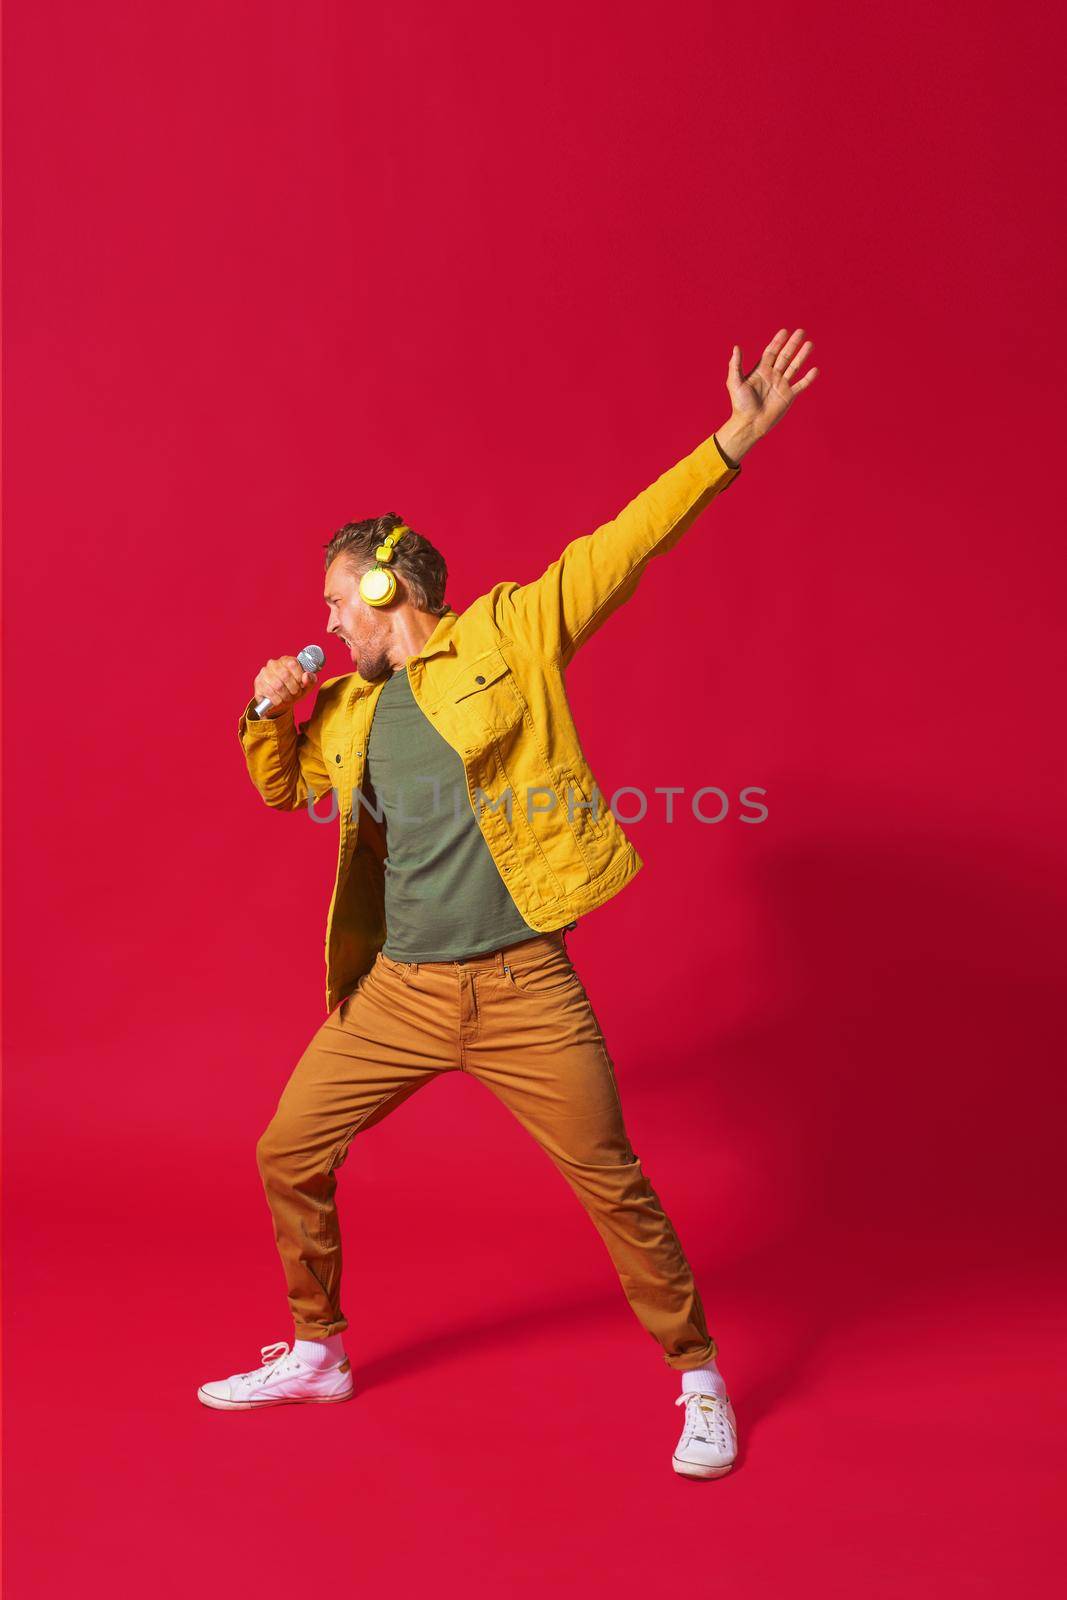 Singing young man enjoying song dancing with one hand up using phone and wireless headphones wearing jeans yellow jacket isolated on red background. Man sing while recording his voice.